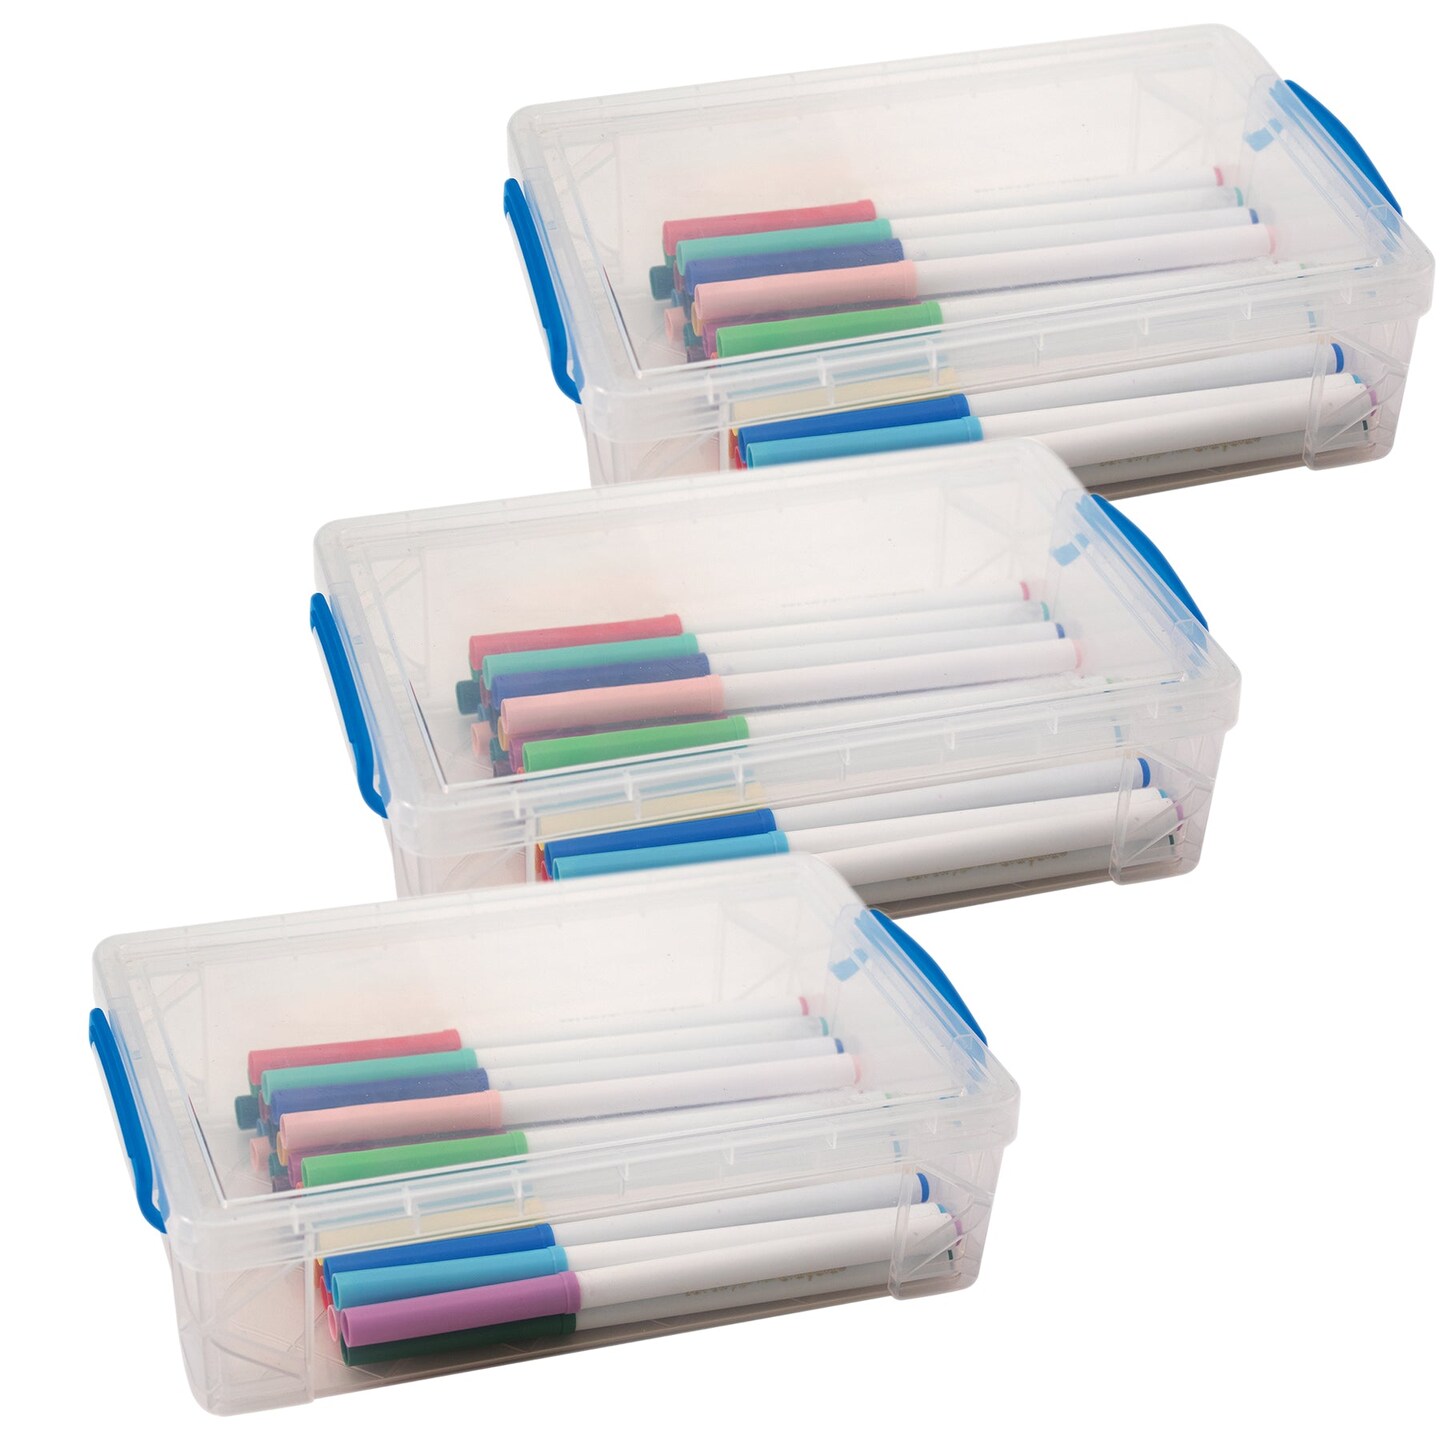 Pack of 3 - Large Pencil Box for Kids, Plastic School Supply Box